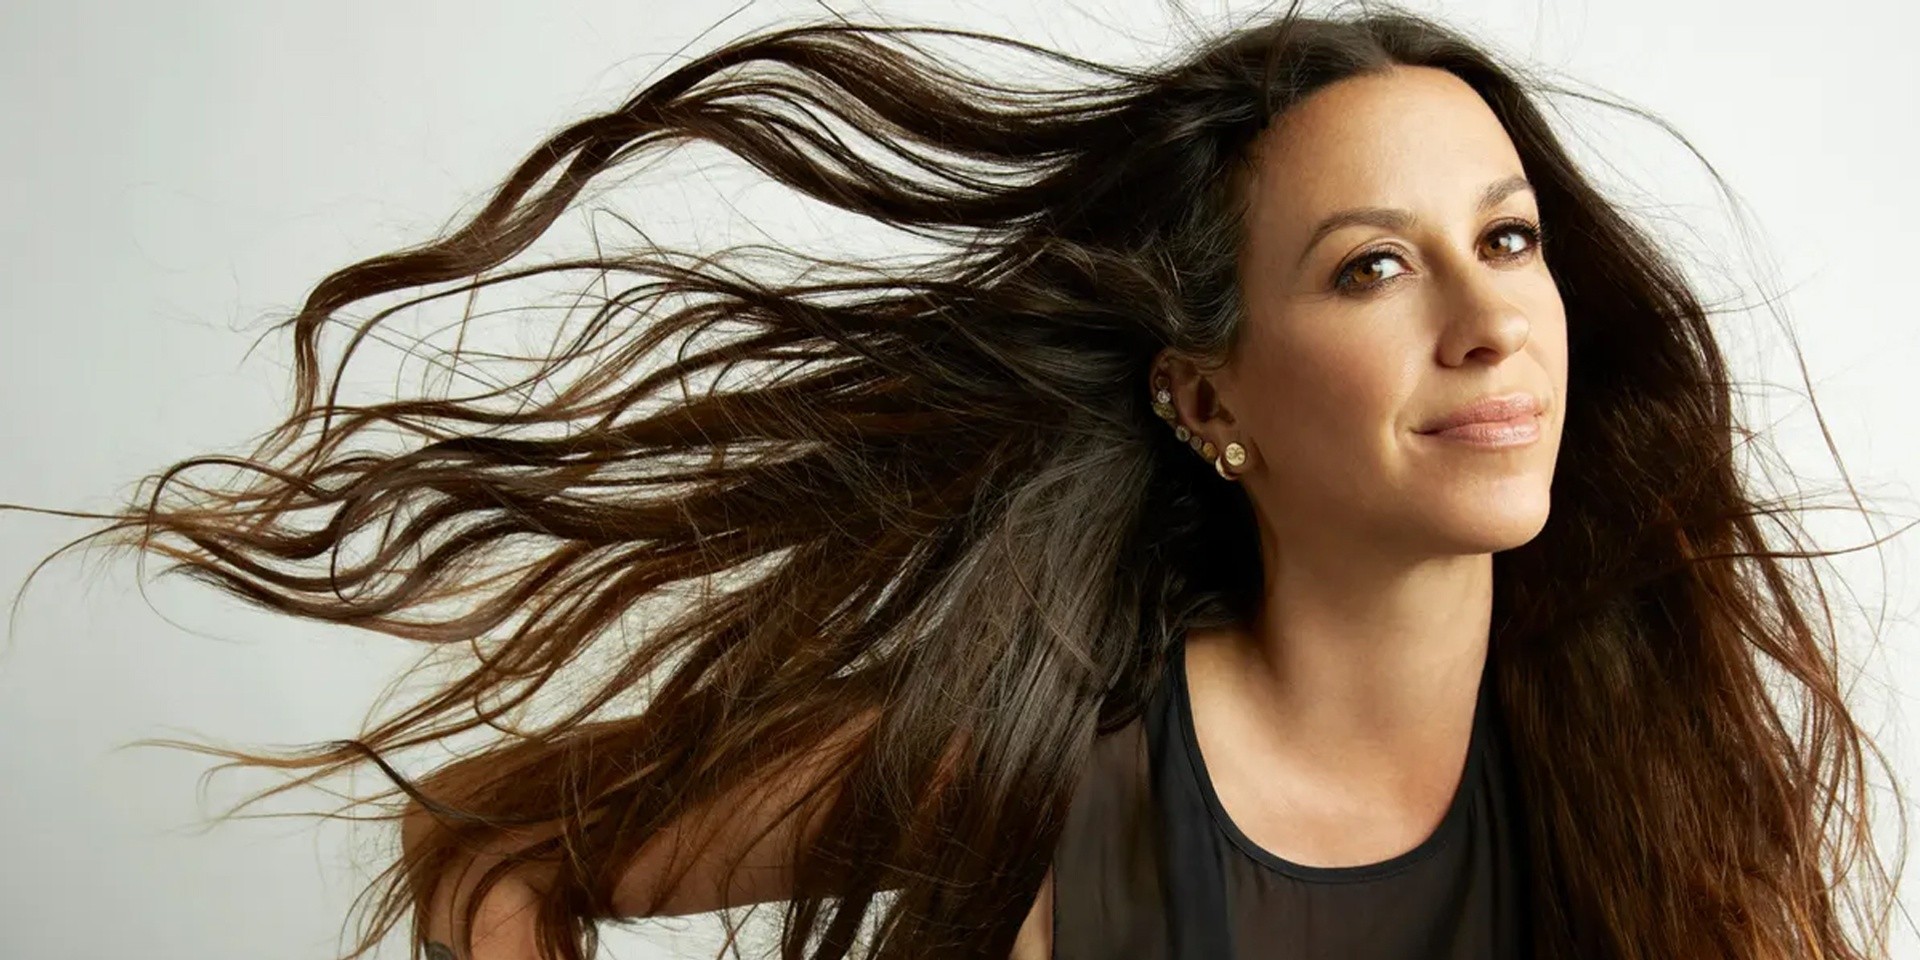 Alanis Morissette's 2-day Manila concerts postponed to late 2022